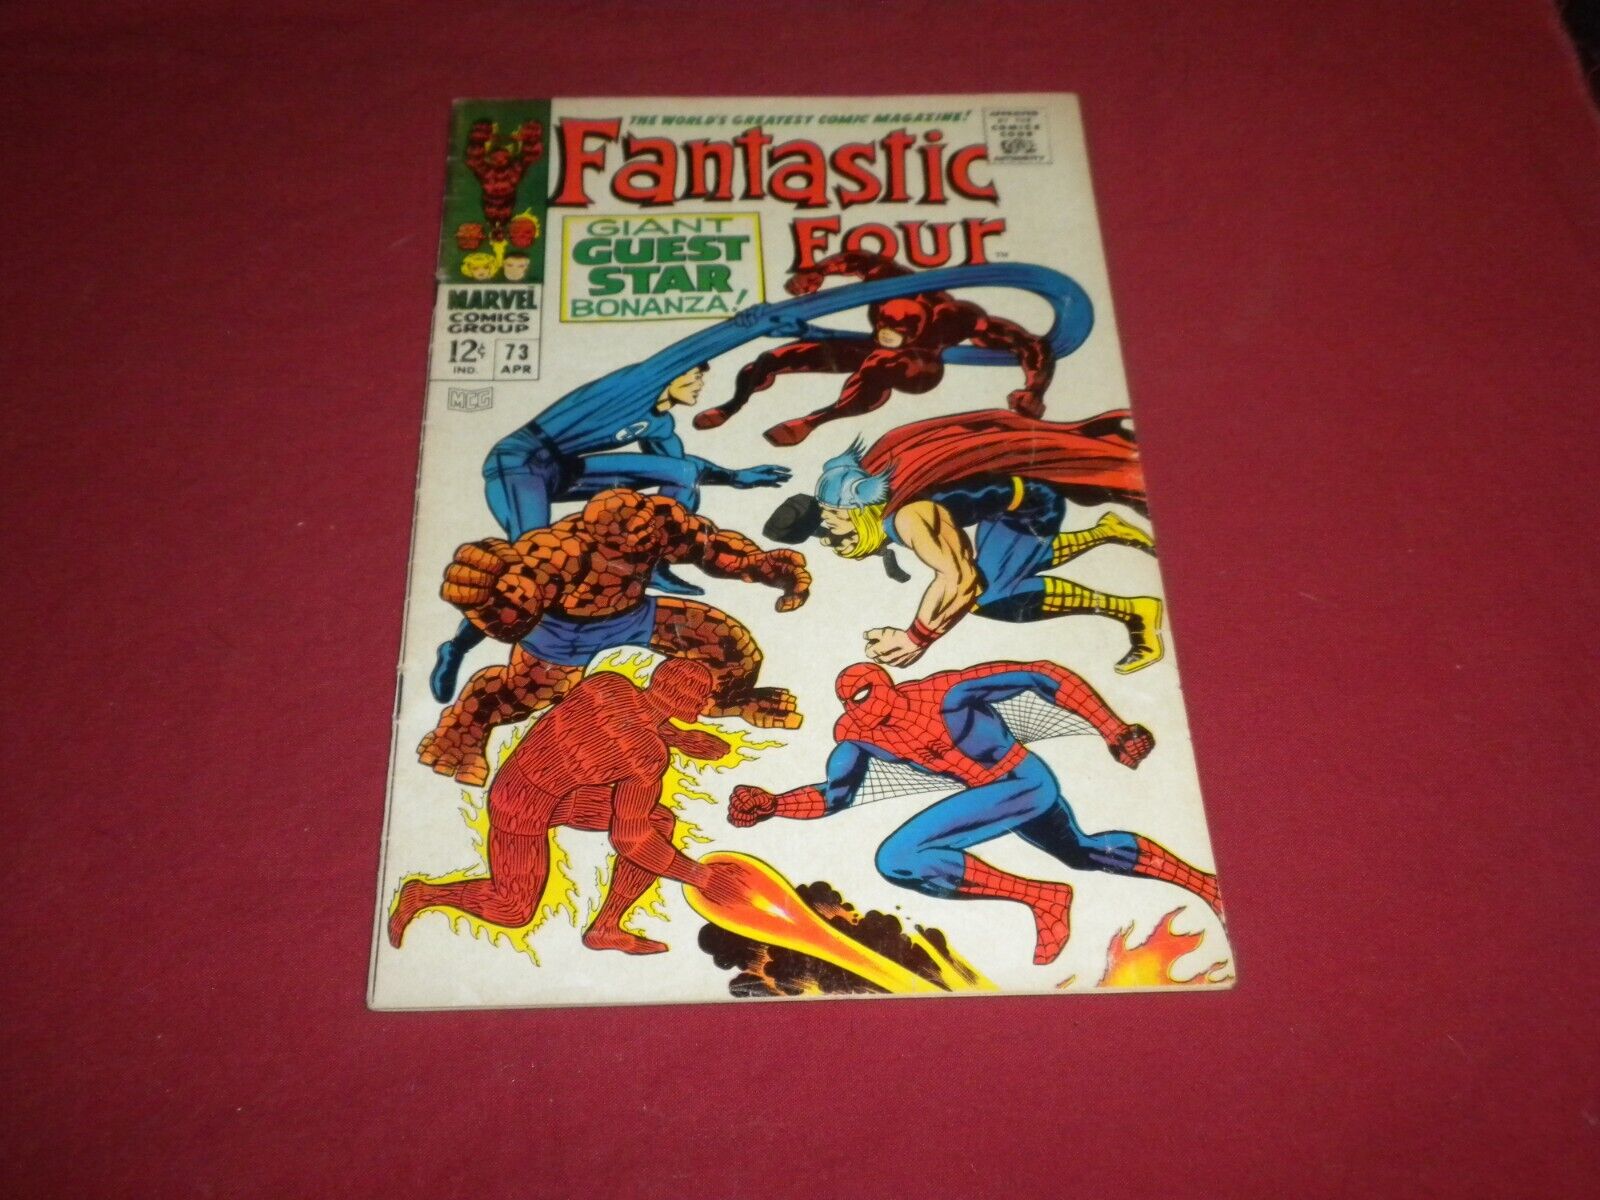 BX3 Fantastic Four #73 marvel 1968 comic book 5.0 silver age GUEST STARS GALORE